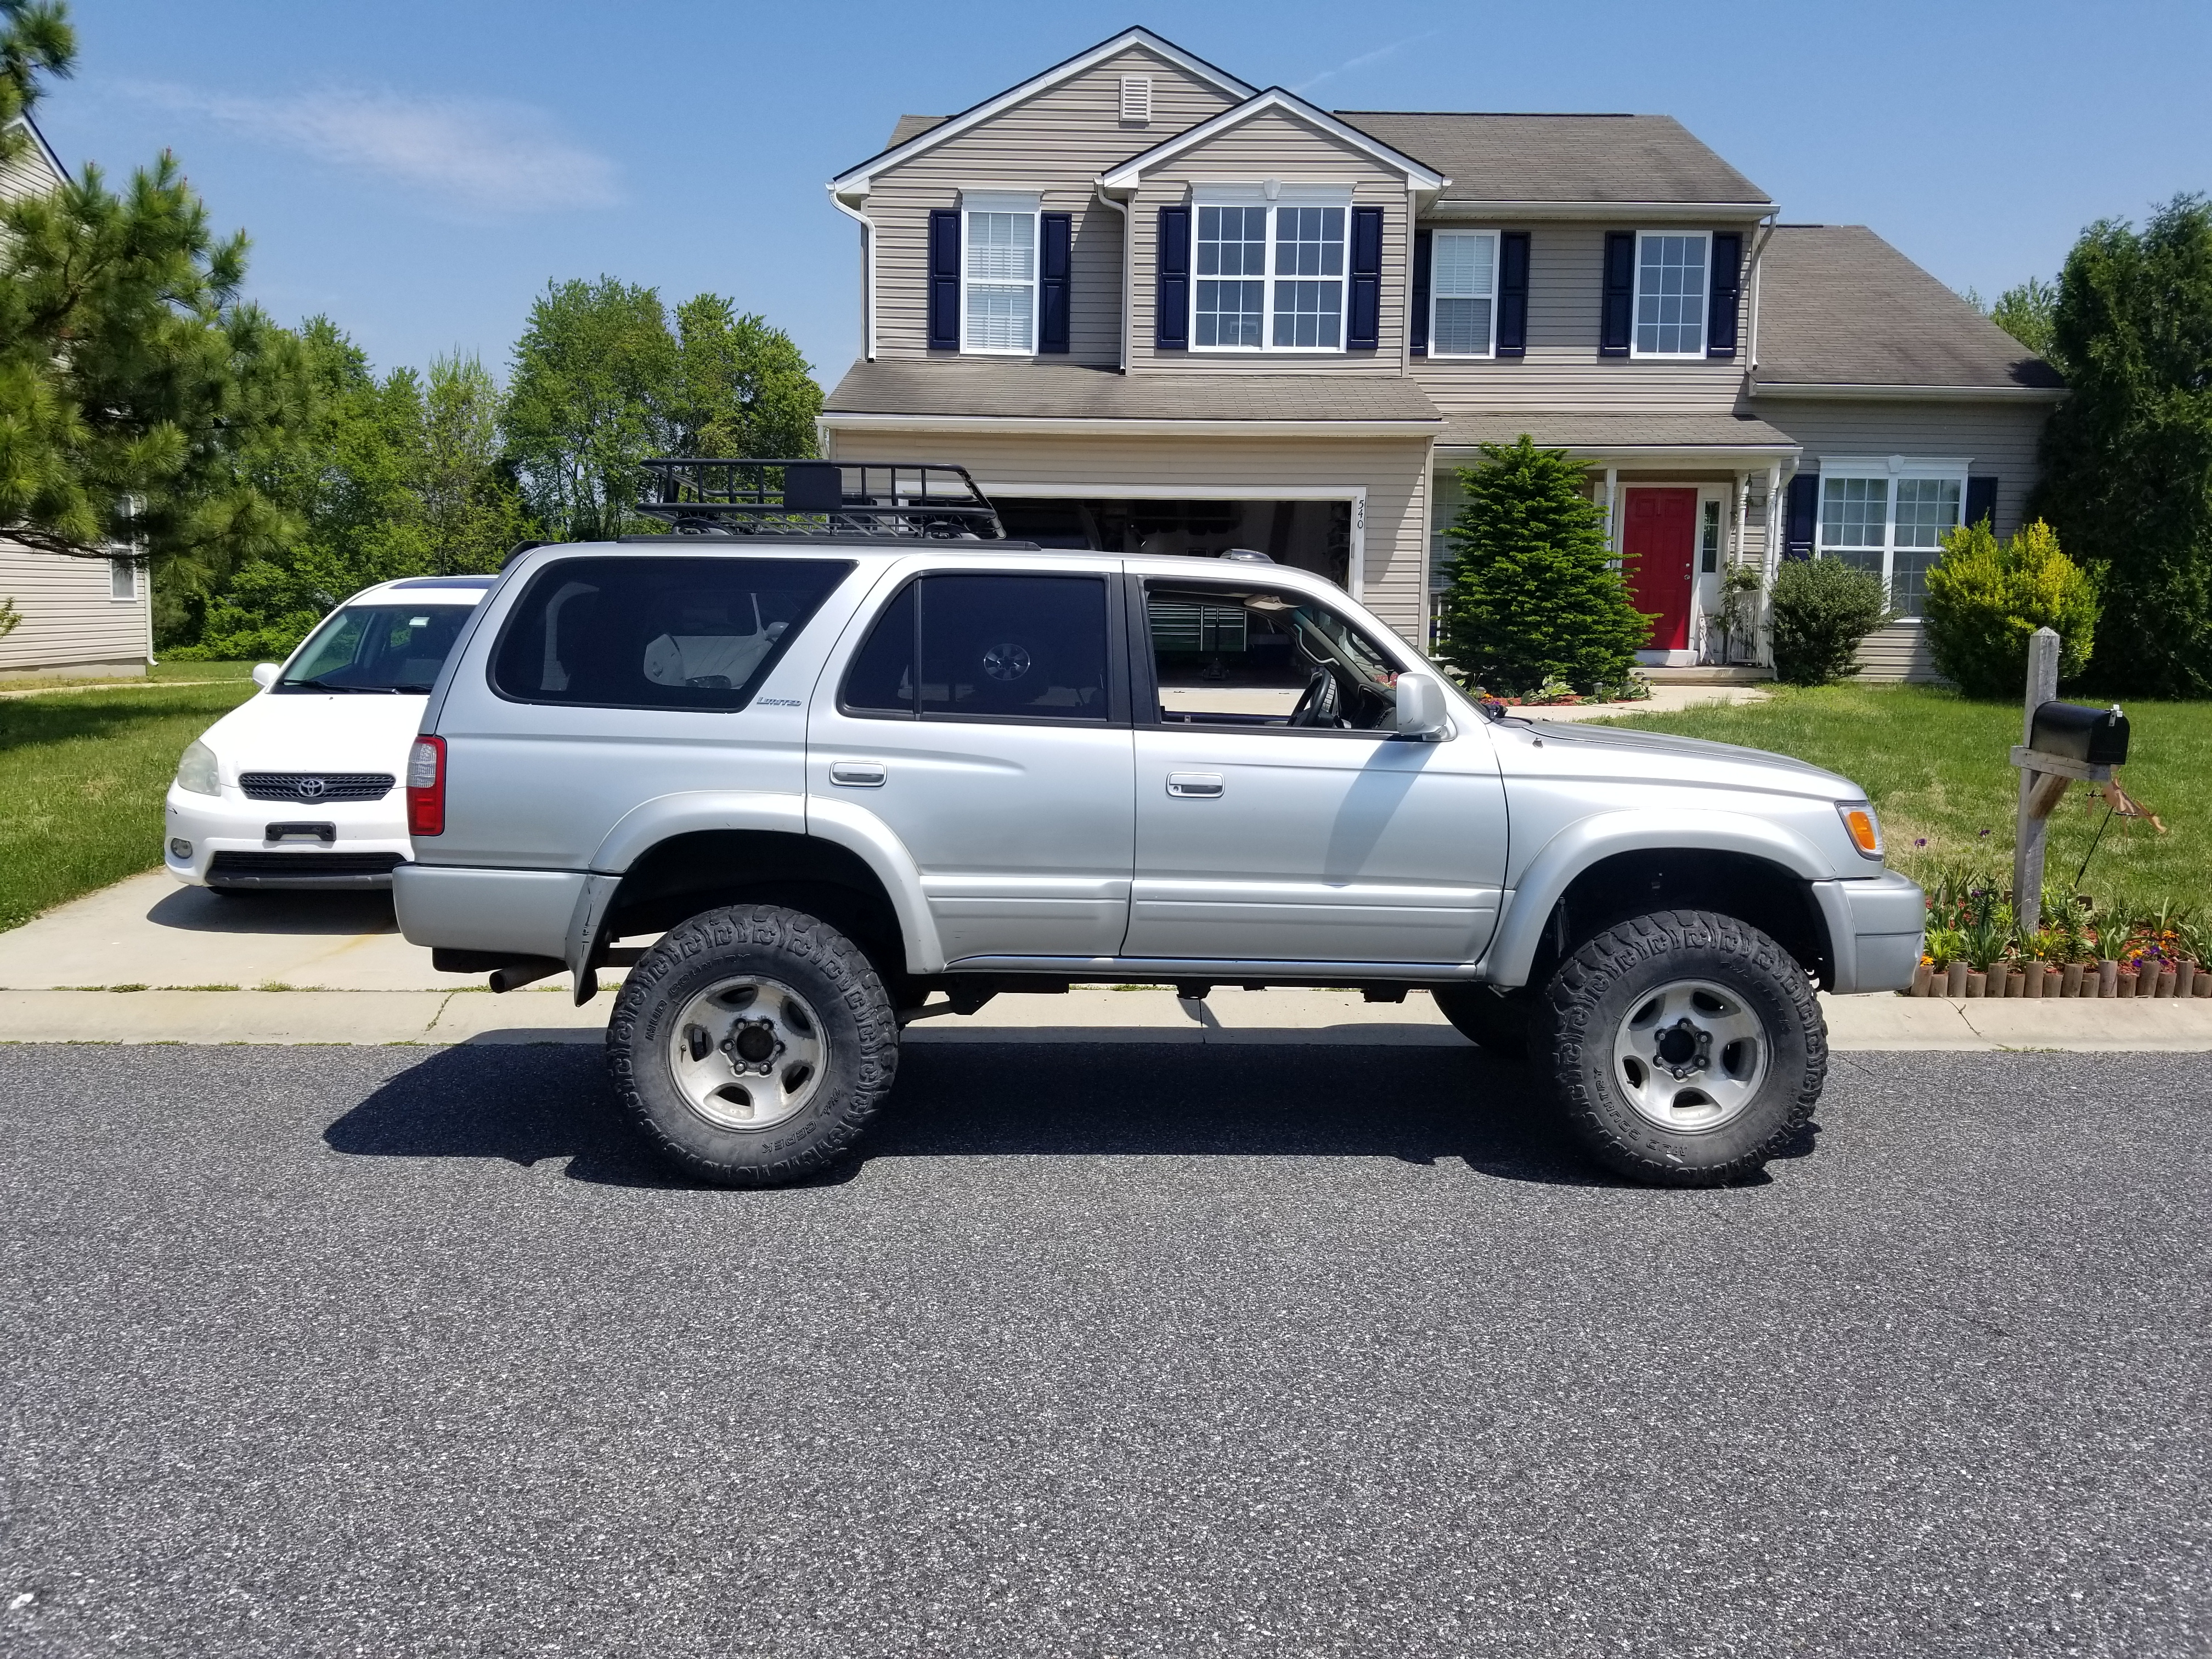 Lifted, locked, and ready to rock